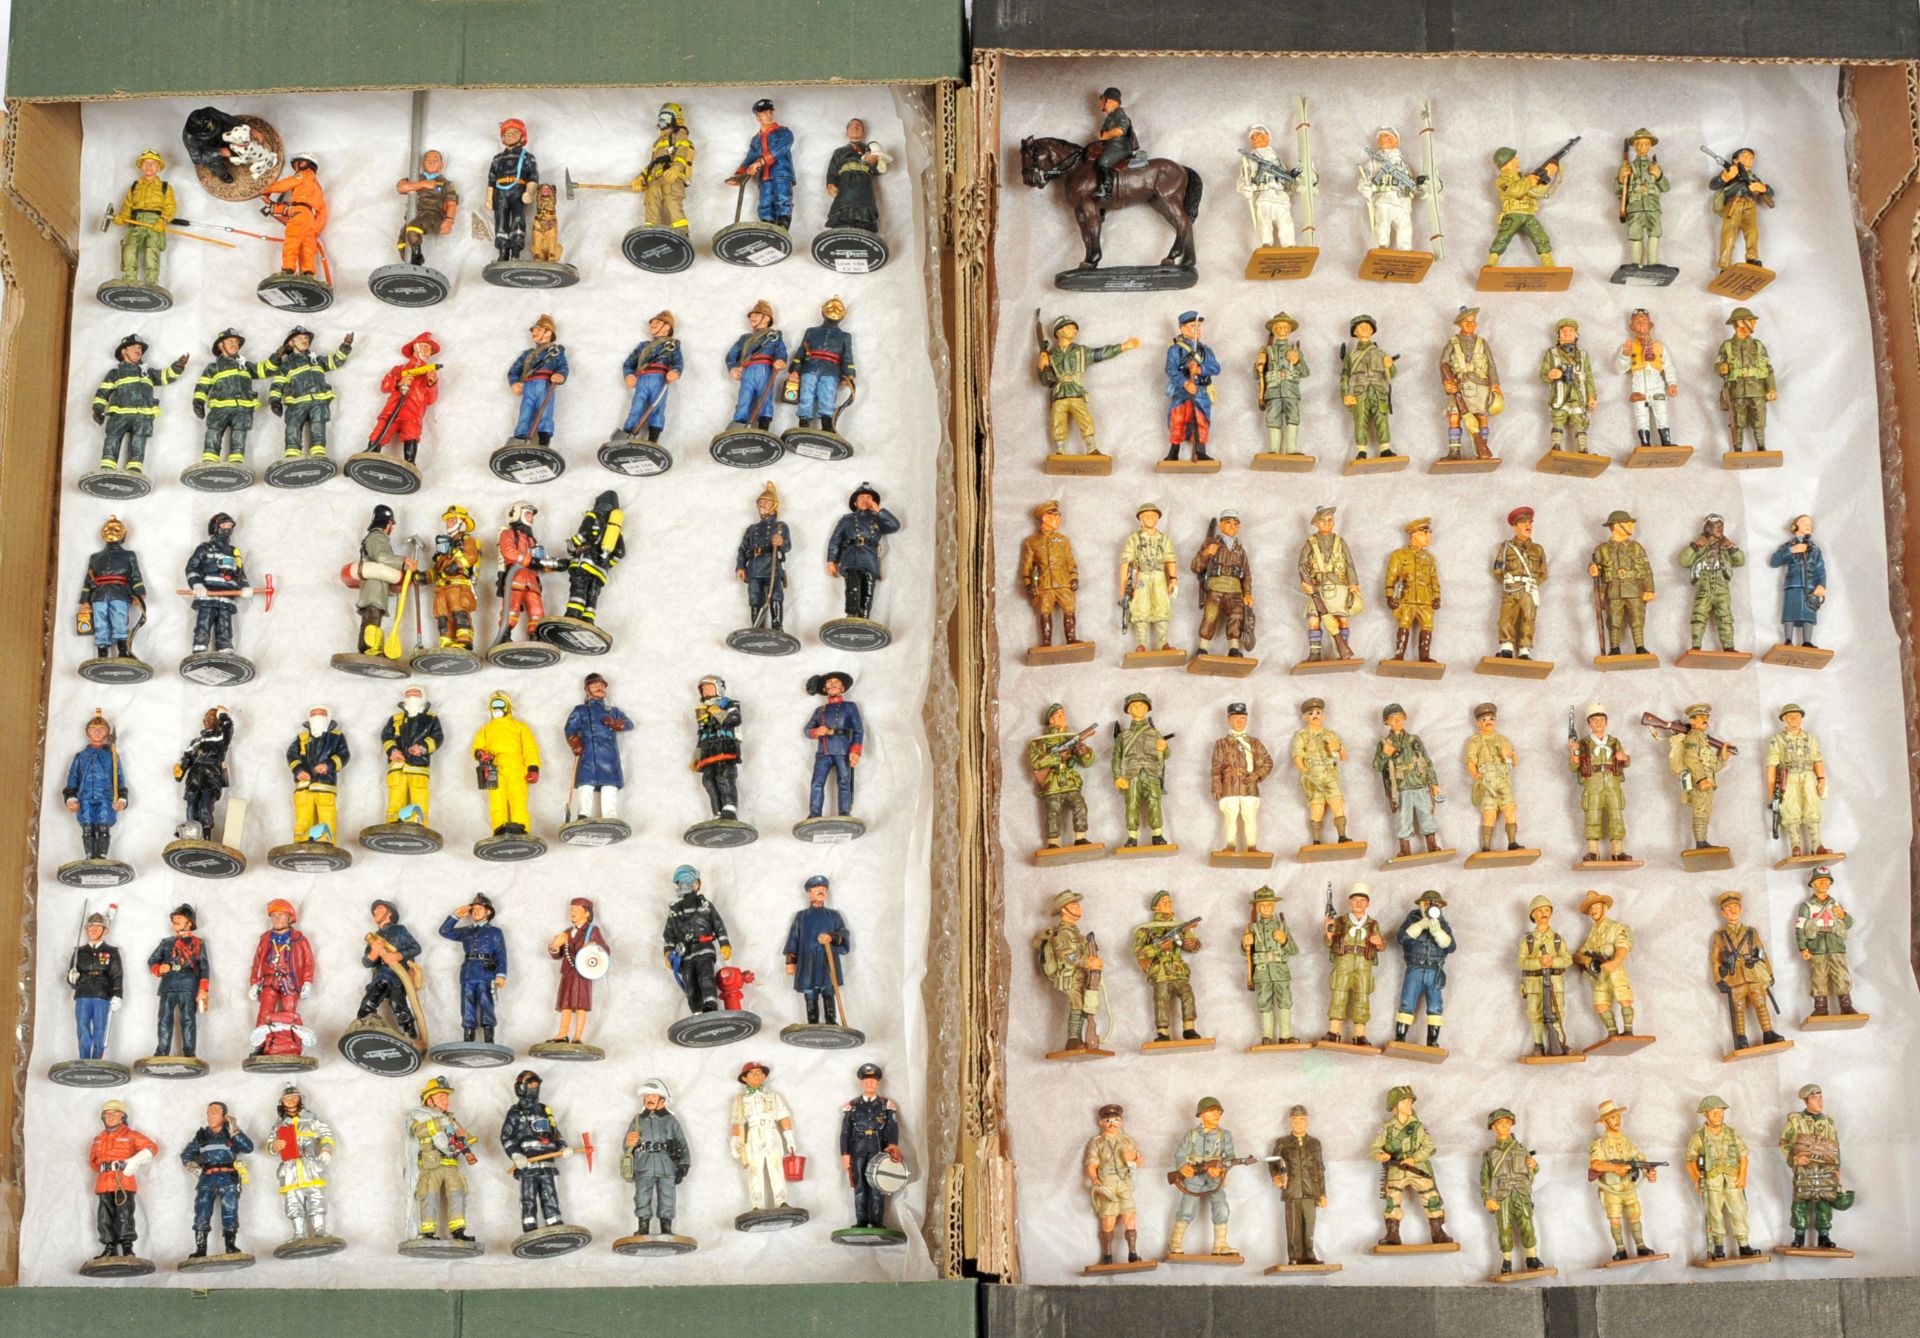 Del Prado Figures - 'Men at War' & 'Firefighters of the World' Series, Unboxed